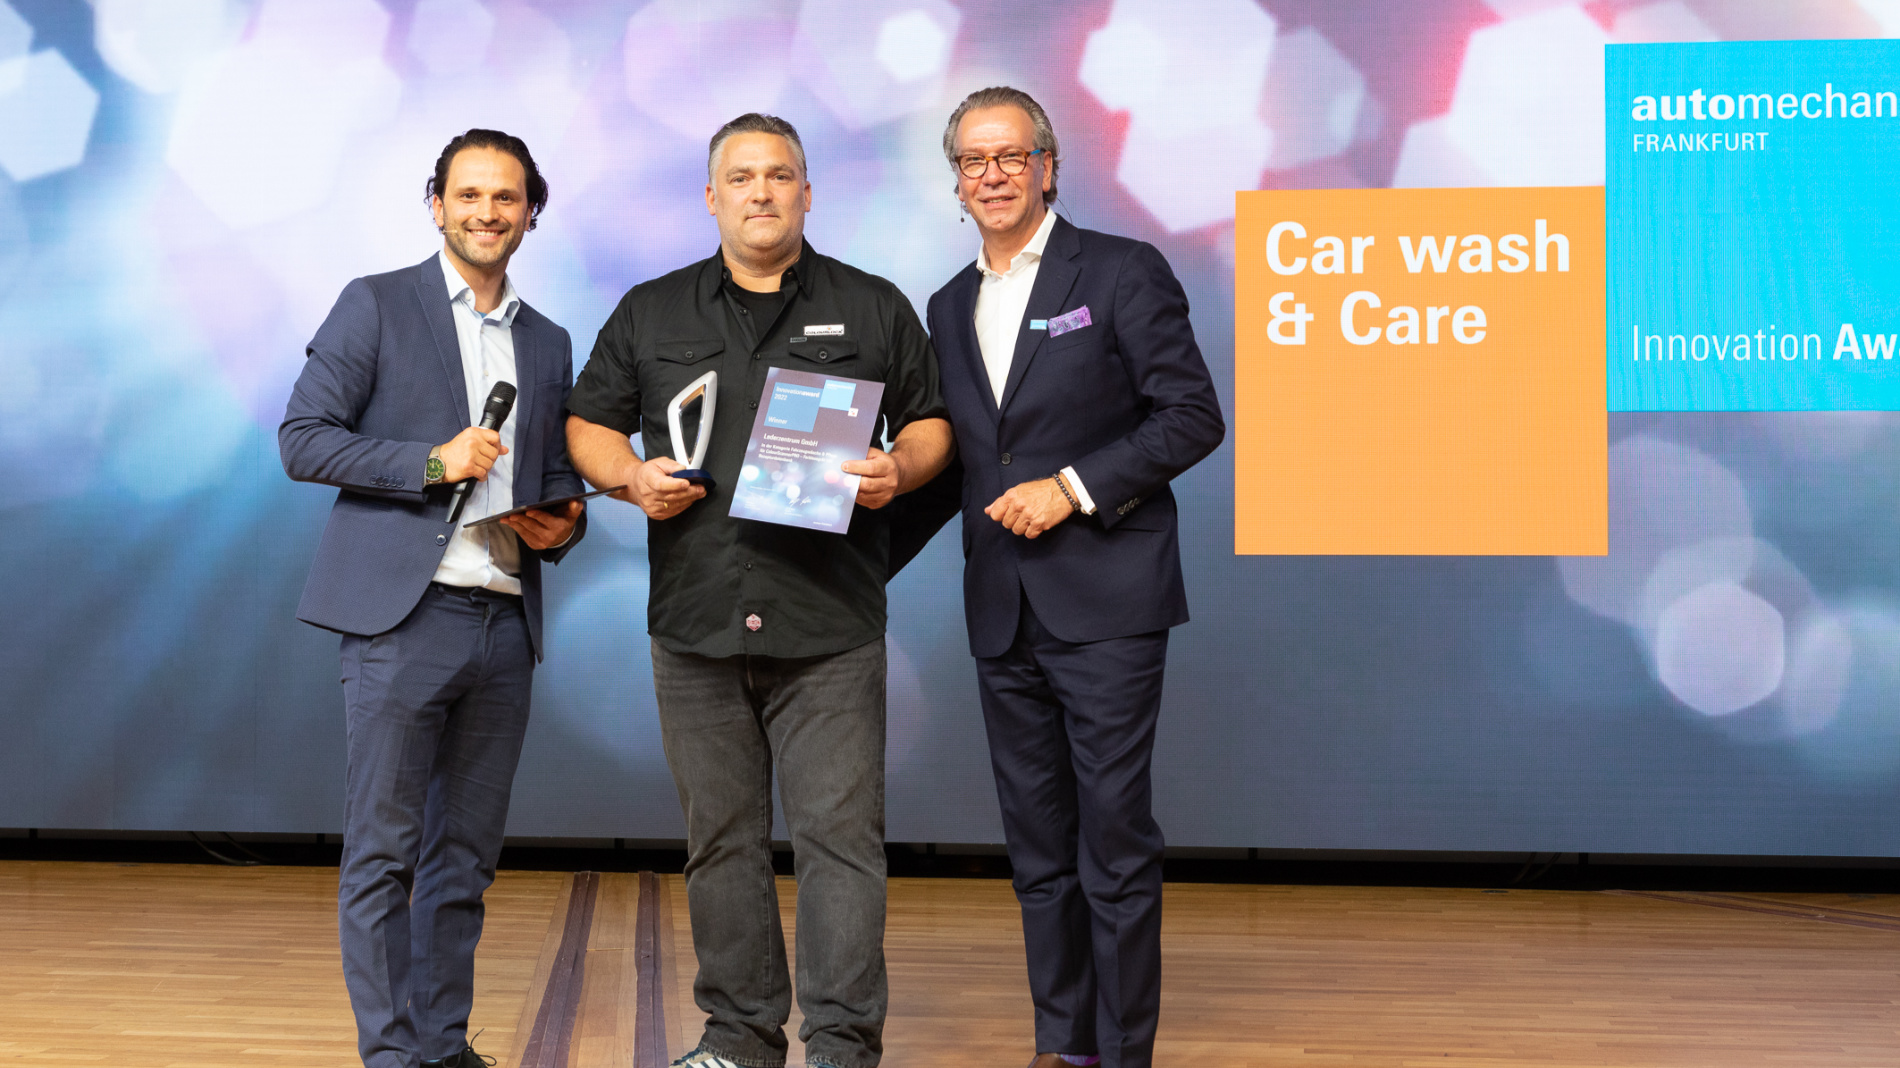 Lars Pickardt from the Leather Centre, winner of the Innovation Award in the Car Wash & Care